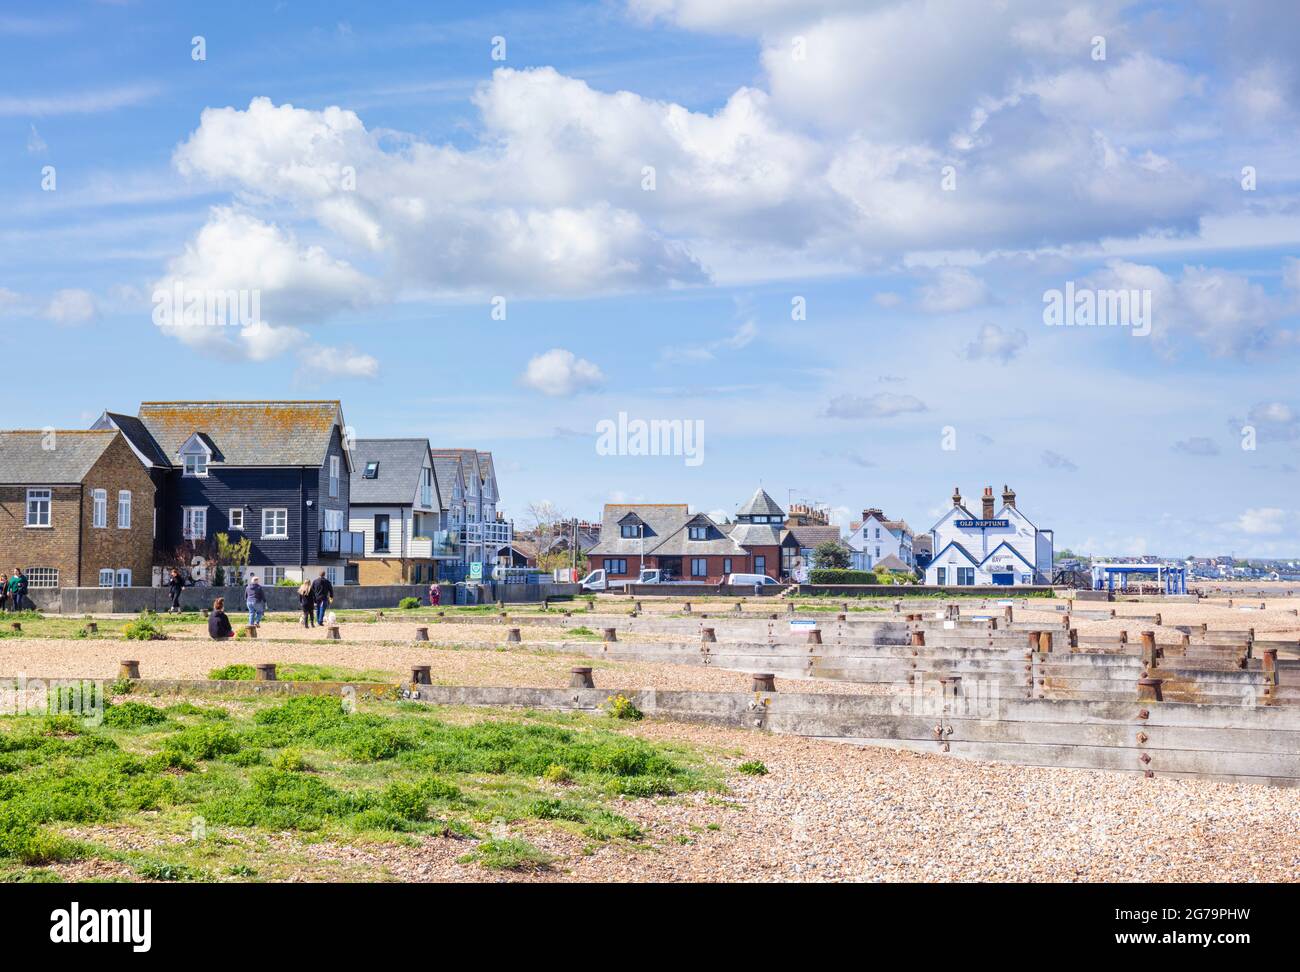 Whitstable sea front looking towards the Old Neptune pub groynes and shingle beach Whitstable Kent England UK GB Europe Stock Photo